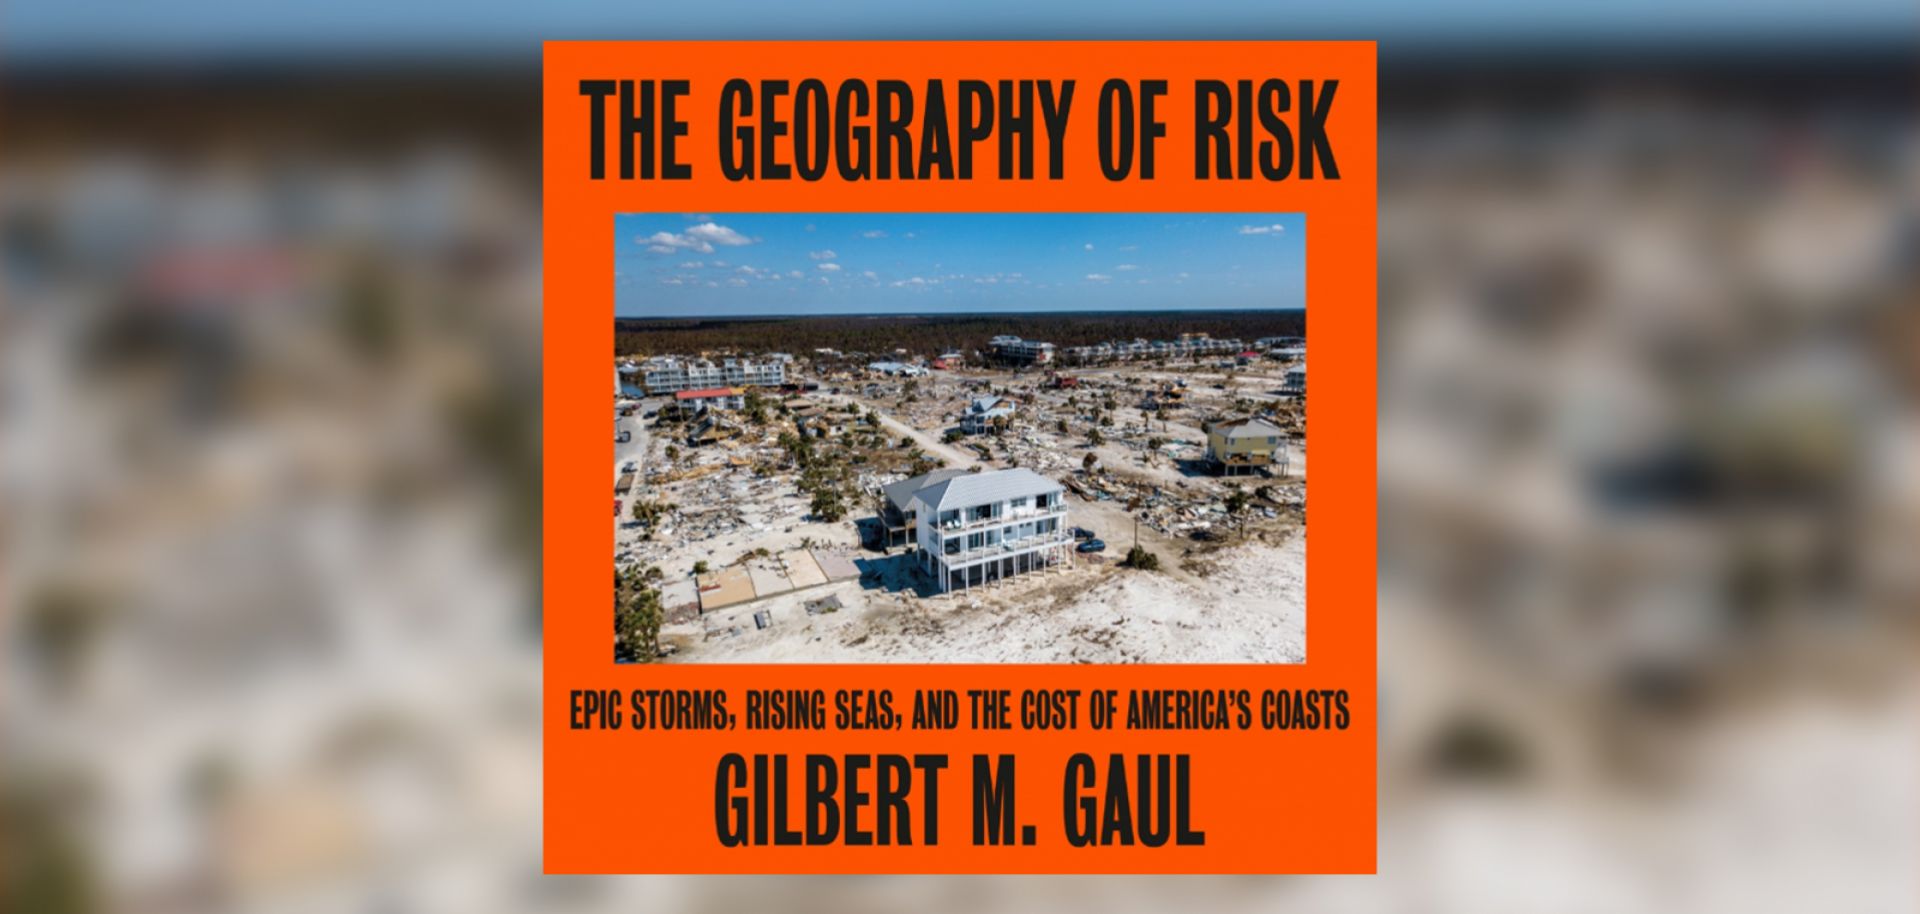 The Geography of Risk takes a look at the risks borne by coastal areas of the globe as giant storms become more frequent.